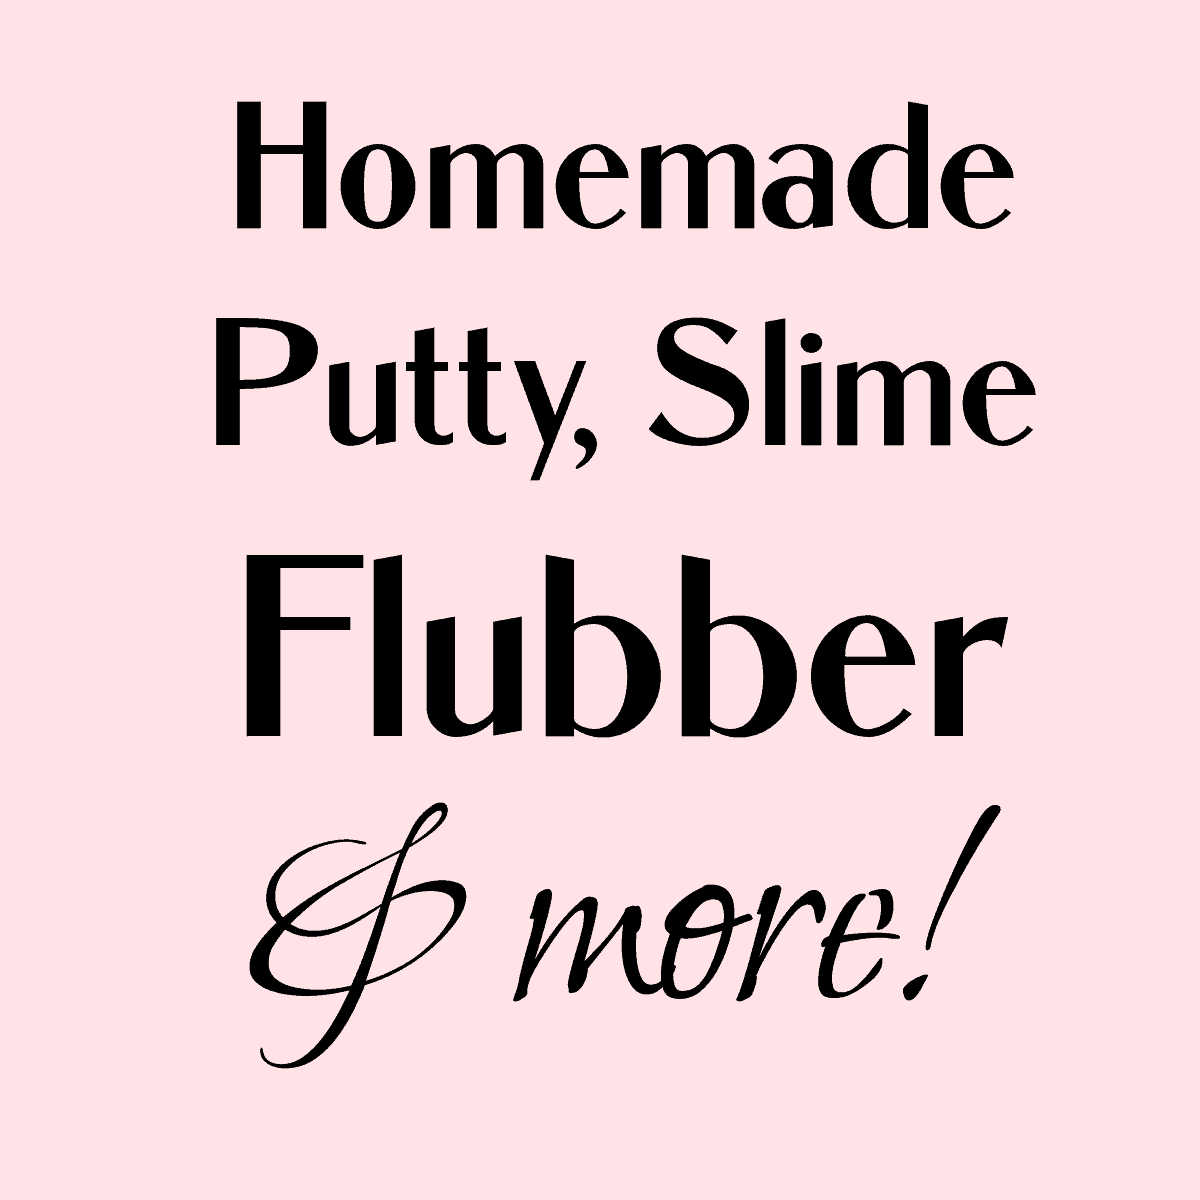 homemade putty slime and flubber.